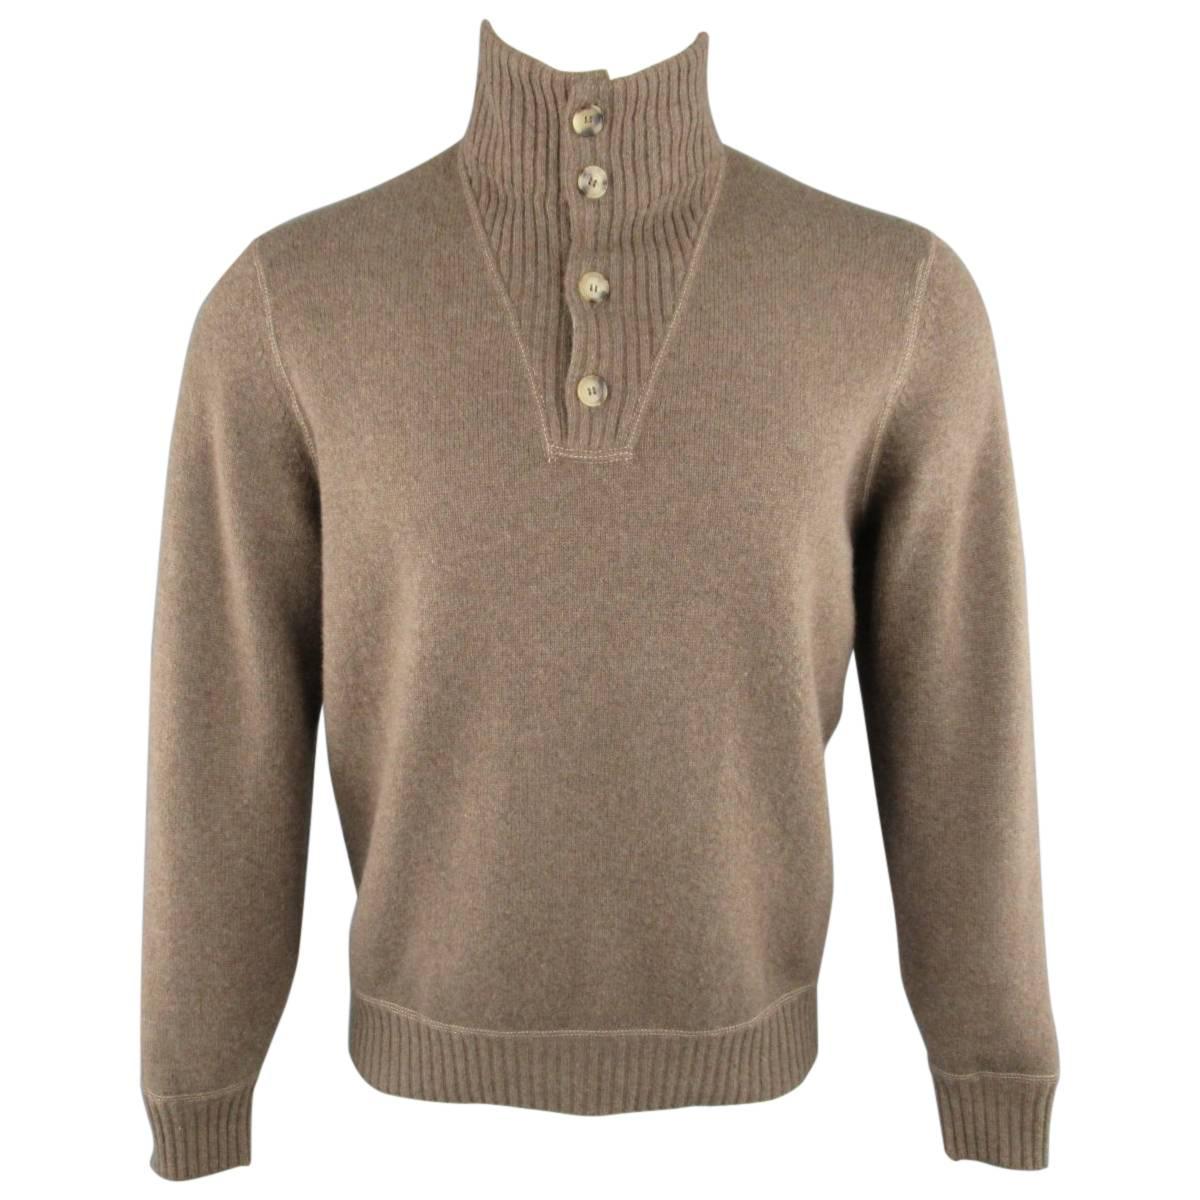 Men's BRUNELLO CUCINELLI S Brown & Gray Knitted Wool / Cashmere Sweater